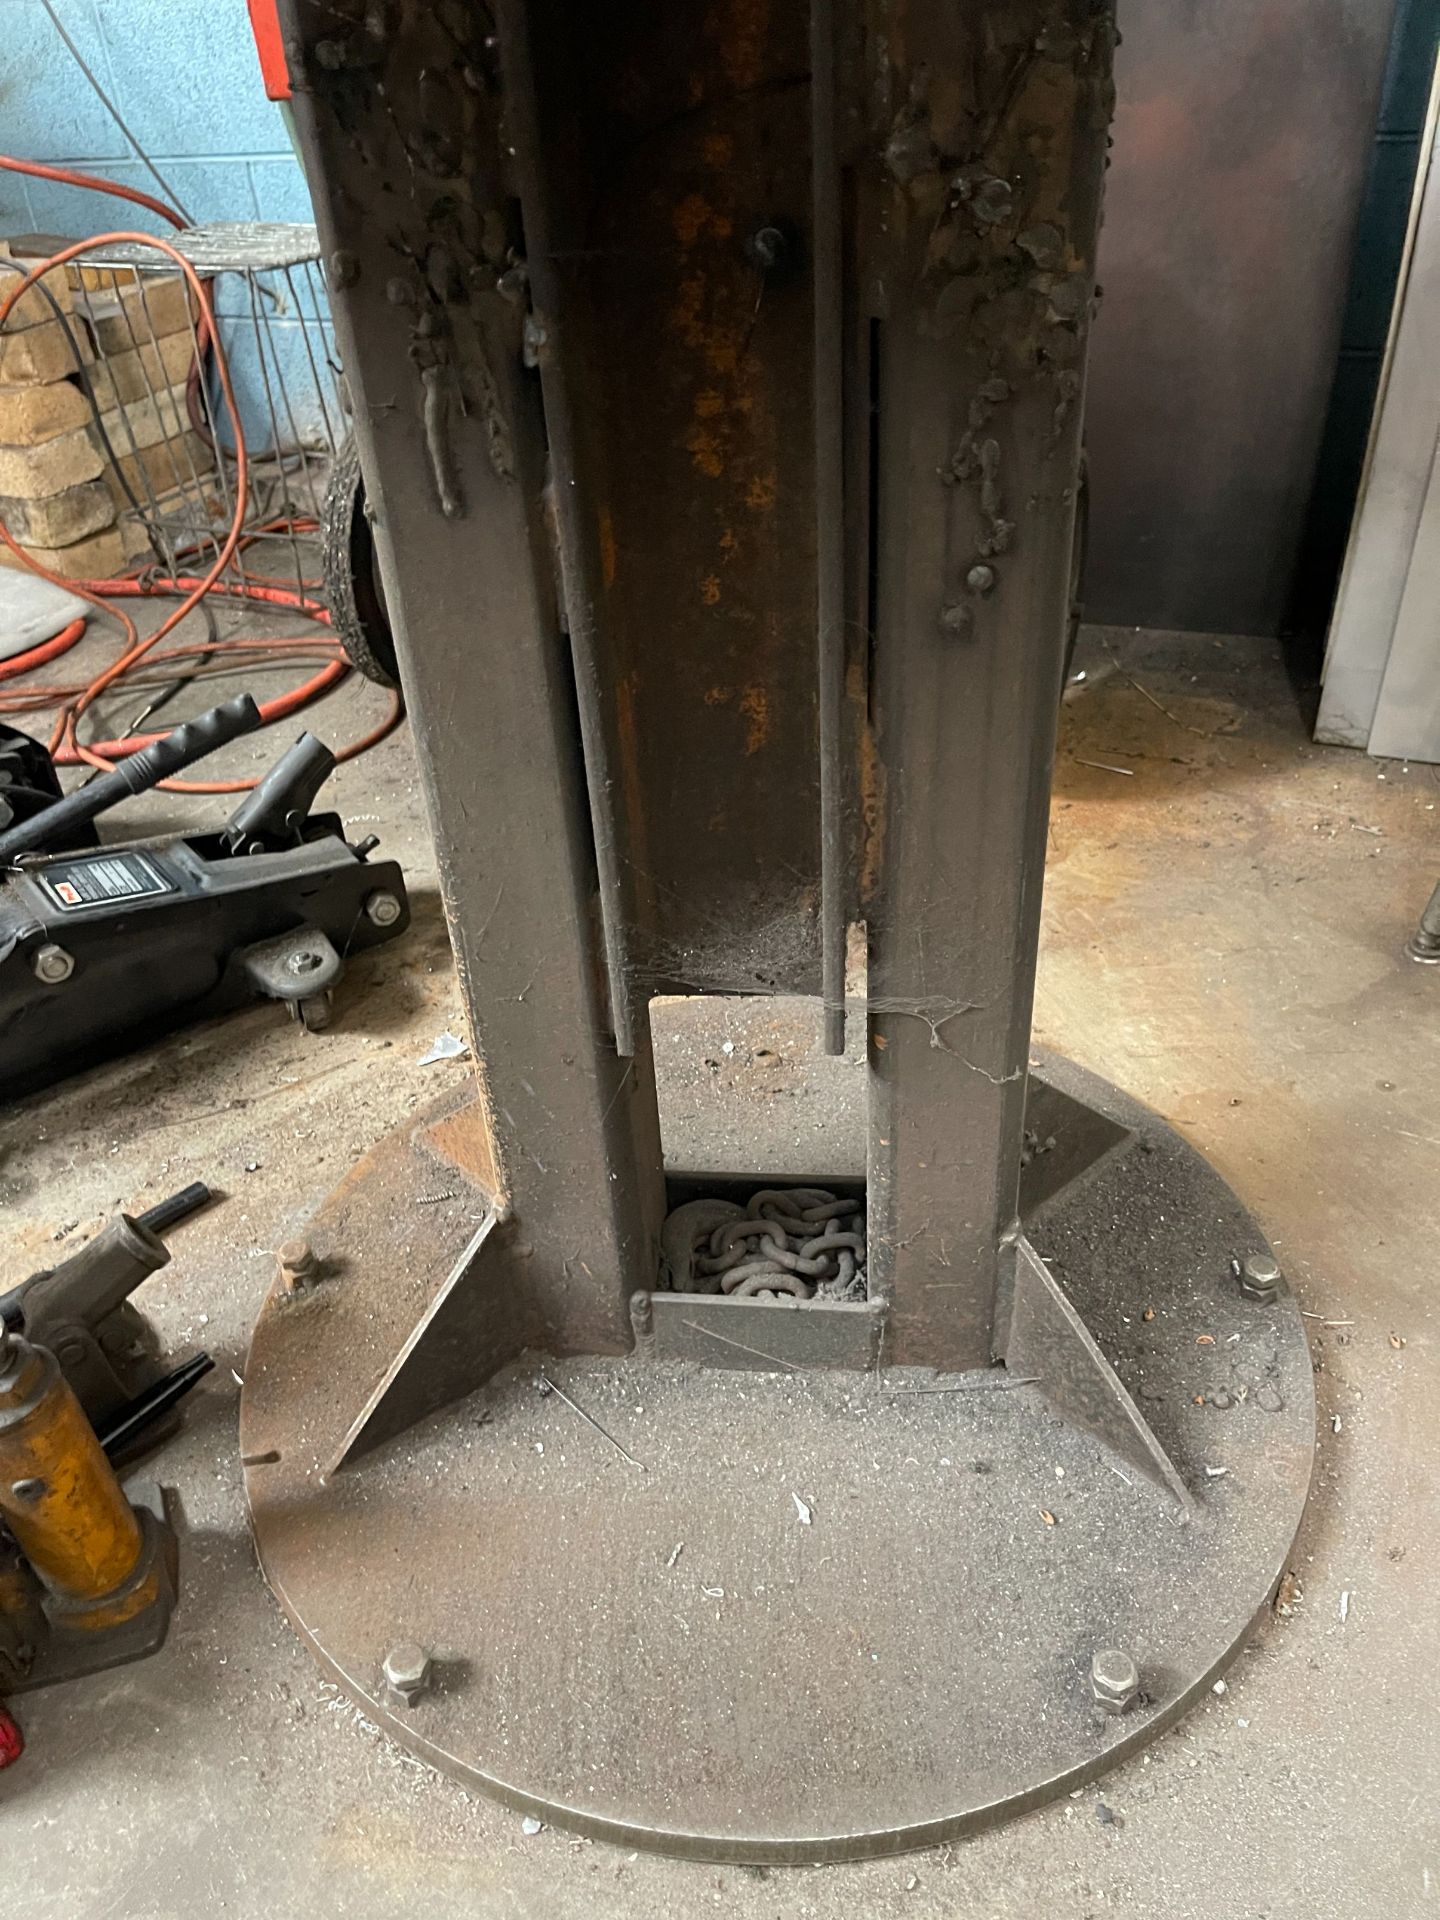 44.5" ROUND WELDING TABLE, CONTENTS NOT INCLUDED - Image 2 of 4